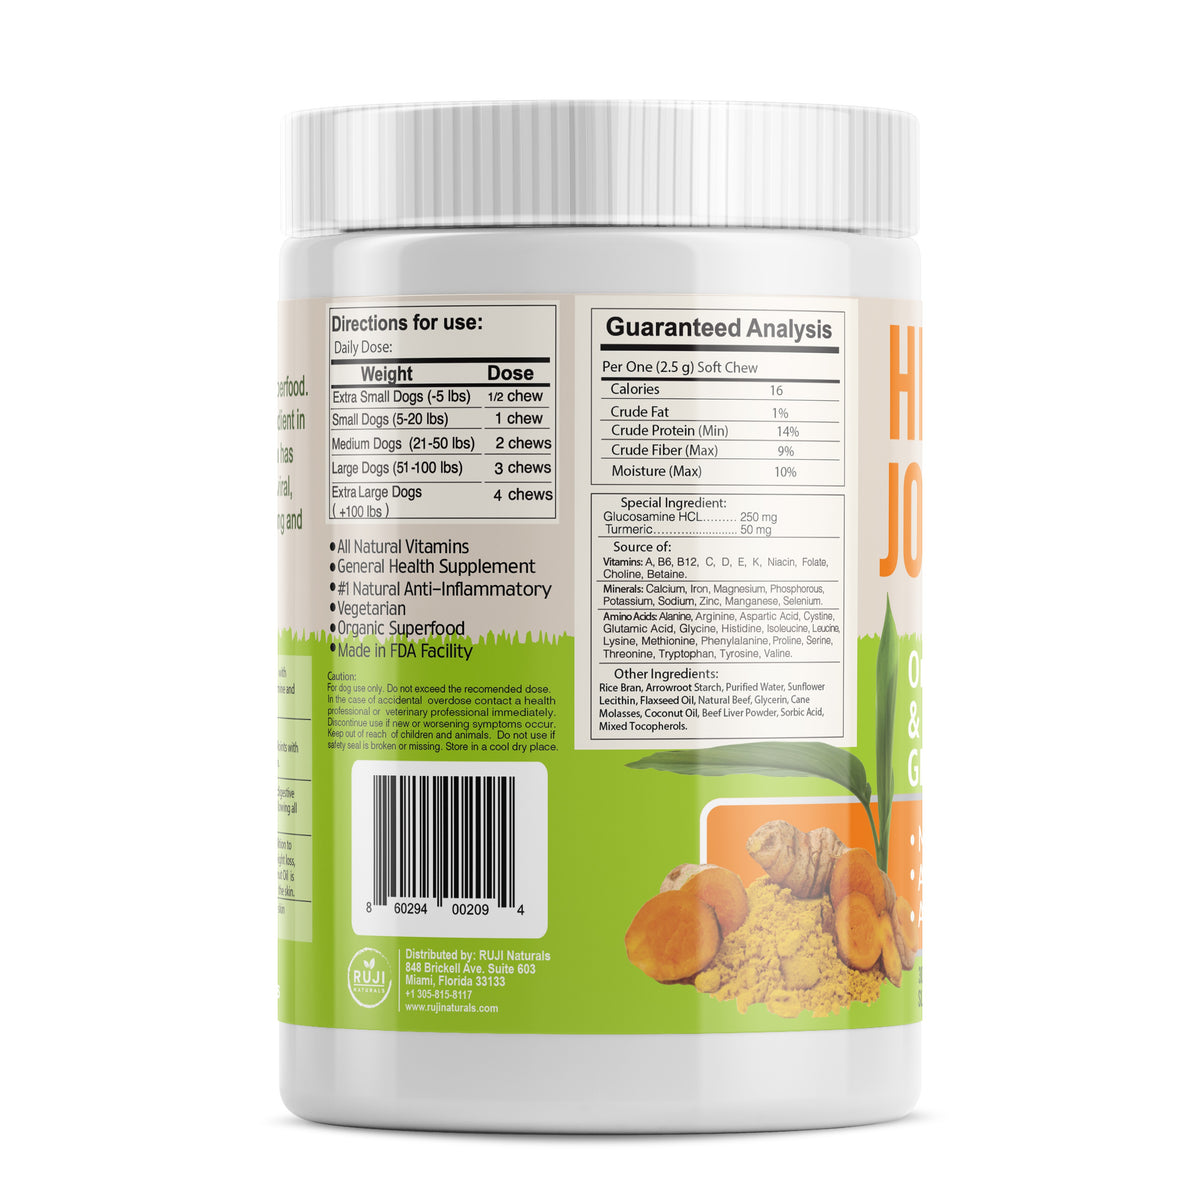 Hip + Joint Superfood Supplement Chews